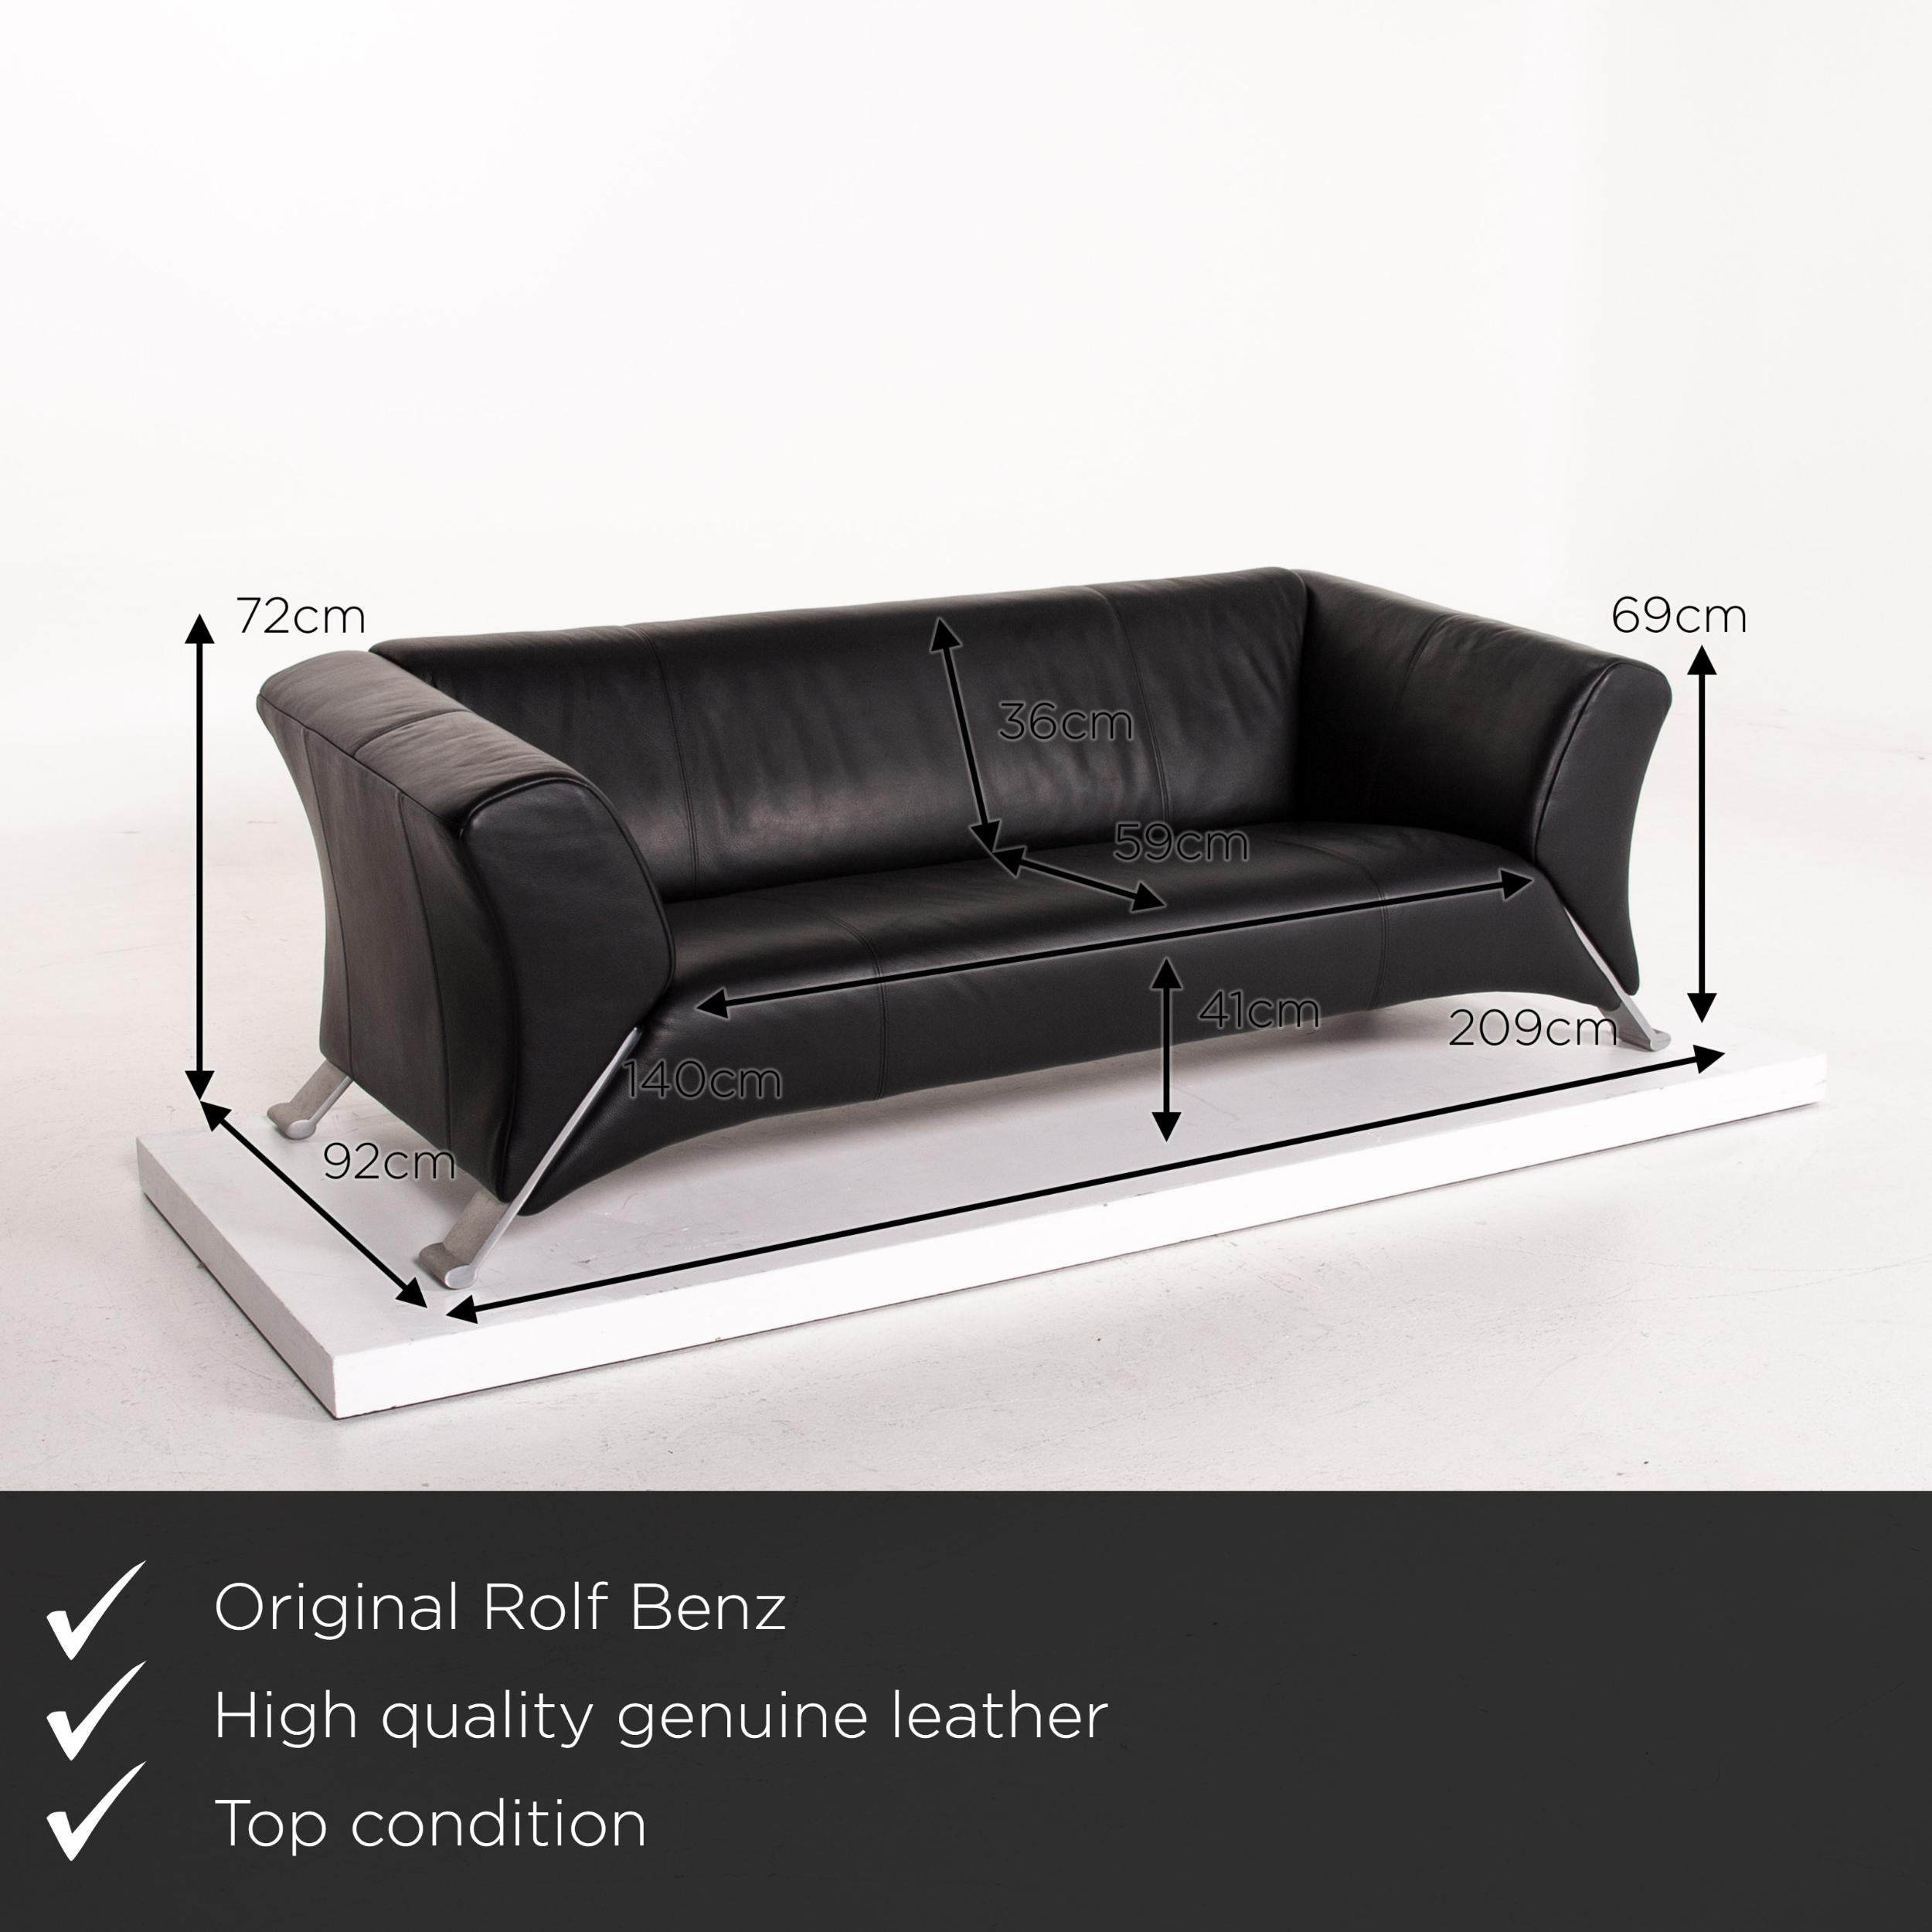 We present to you a Rolf Benz 322 leather sofa black three-seater couch.
 

 Product measurements in centimeters:
 

Depth 92
Width 209
Height 72
Seat height 41
Rest height 69
Seat depth 59
Seat width 140
Back height 36.
 